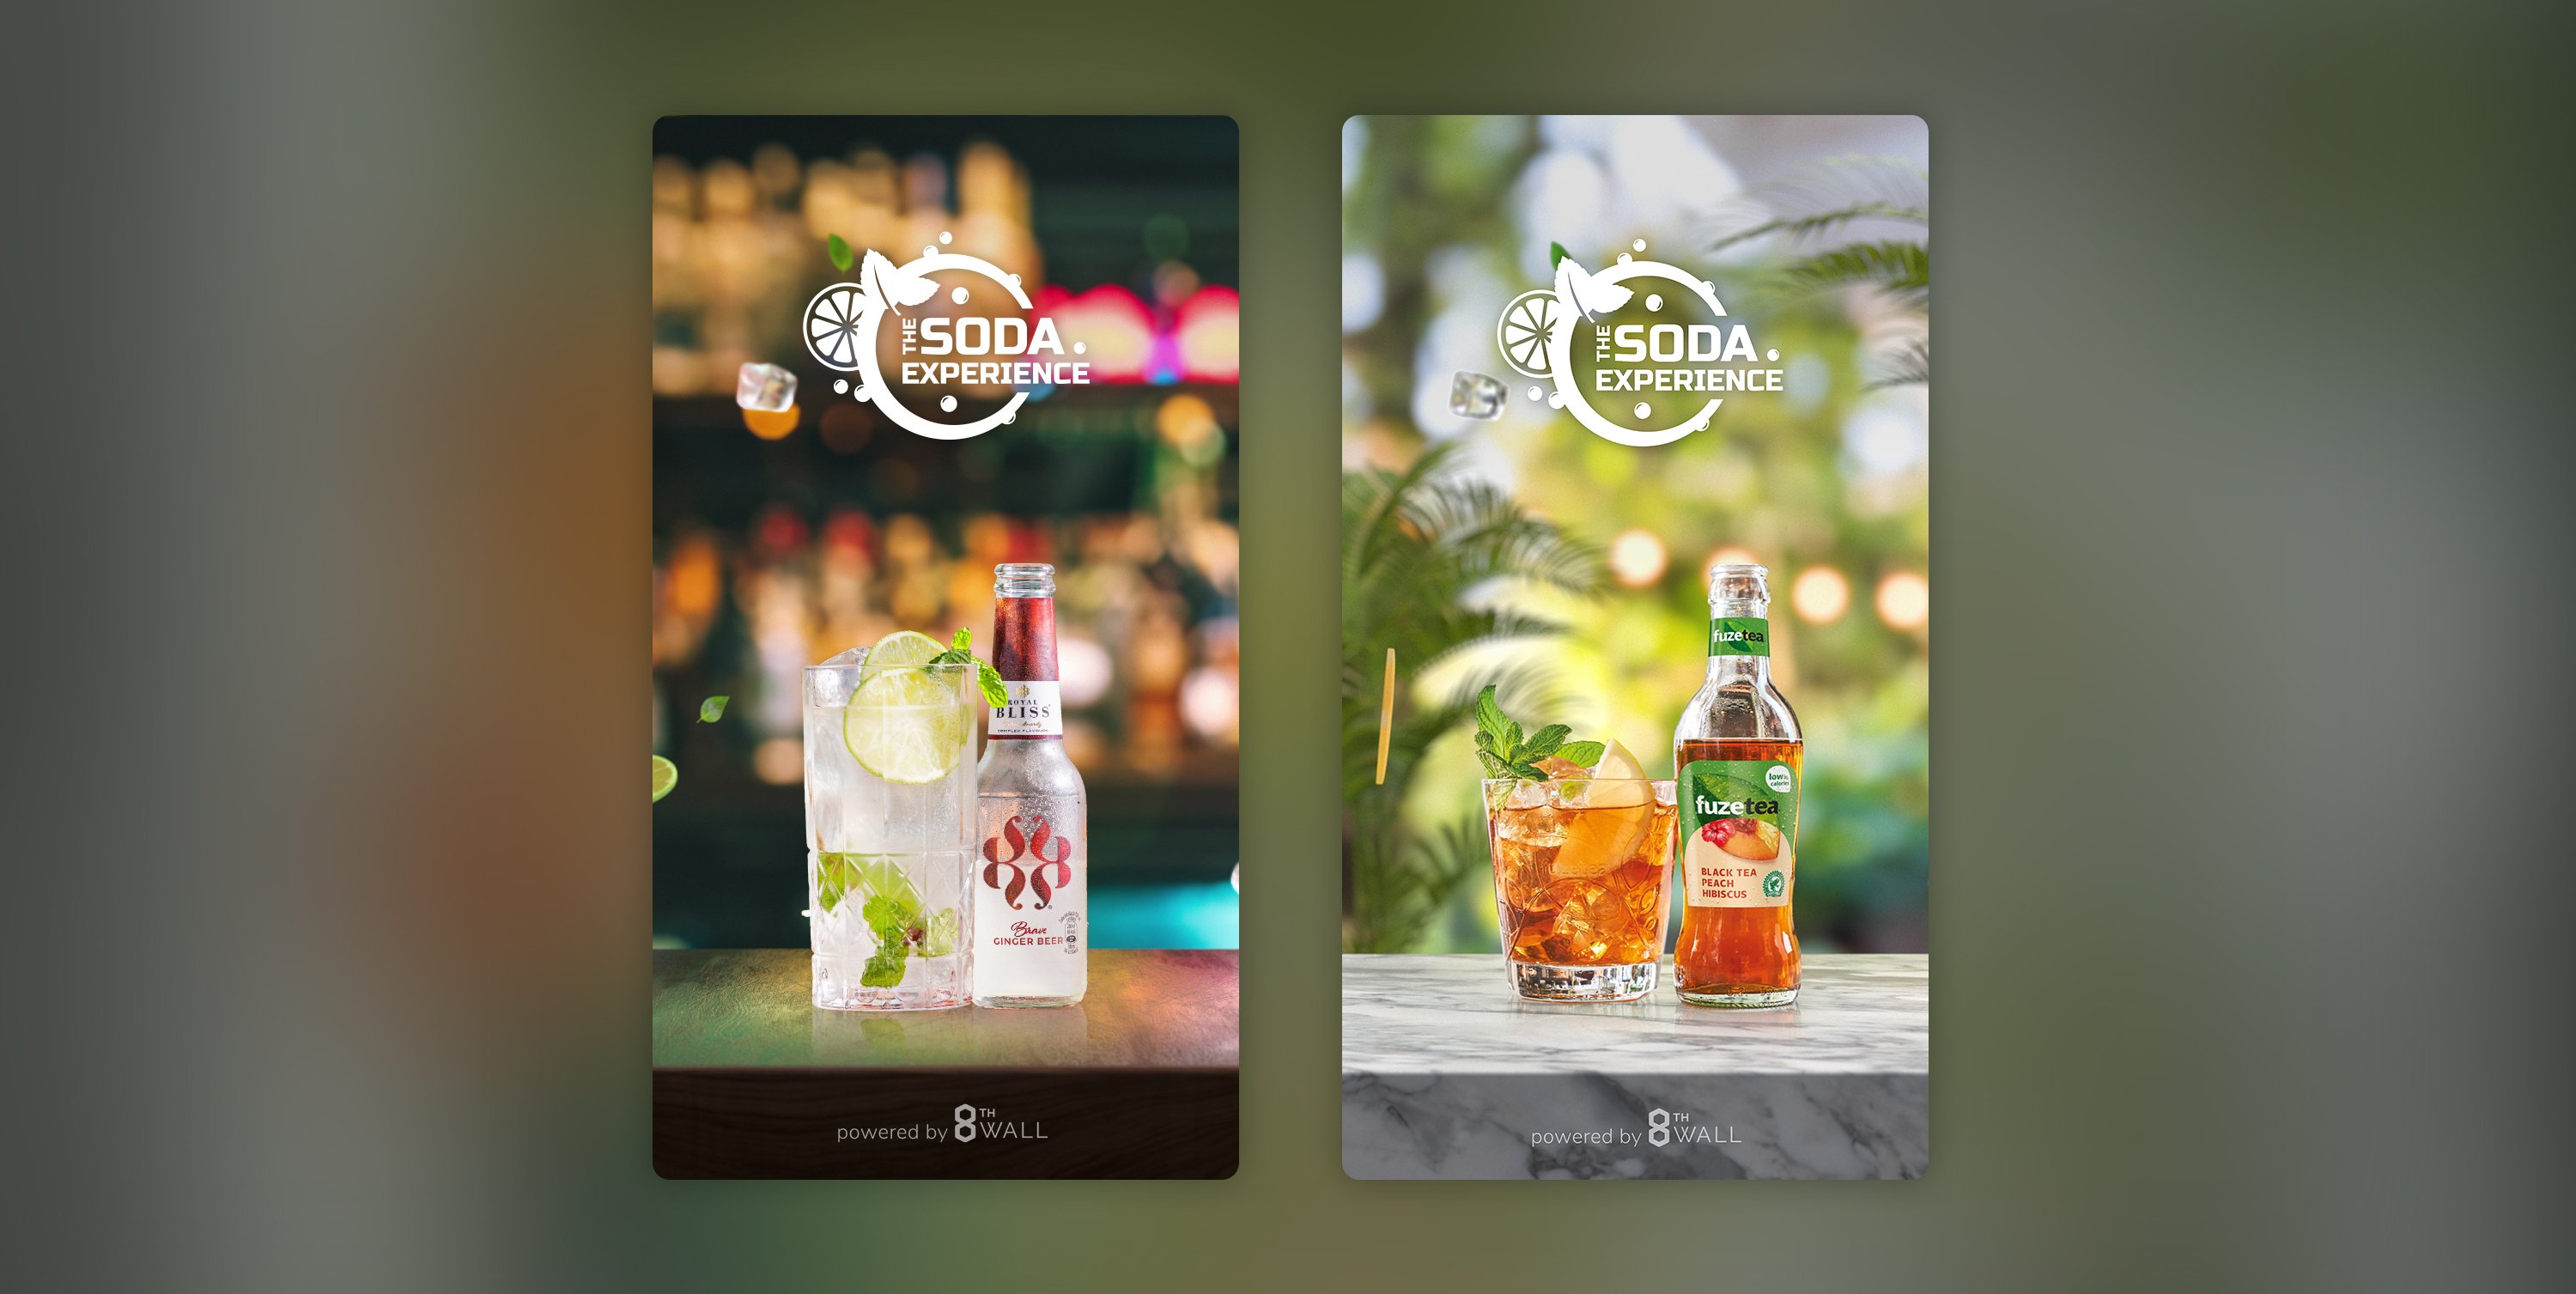 Coca-Cola Europacific Partners NL is the first company in the world to add AR experience to the serving of soft drinks